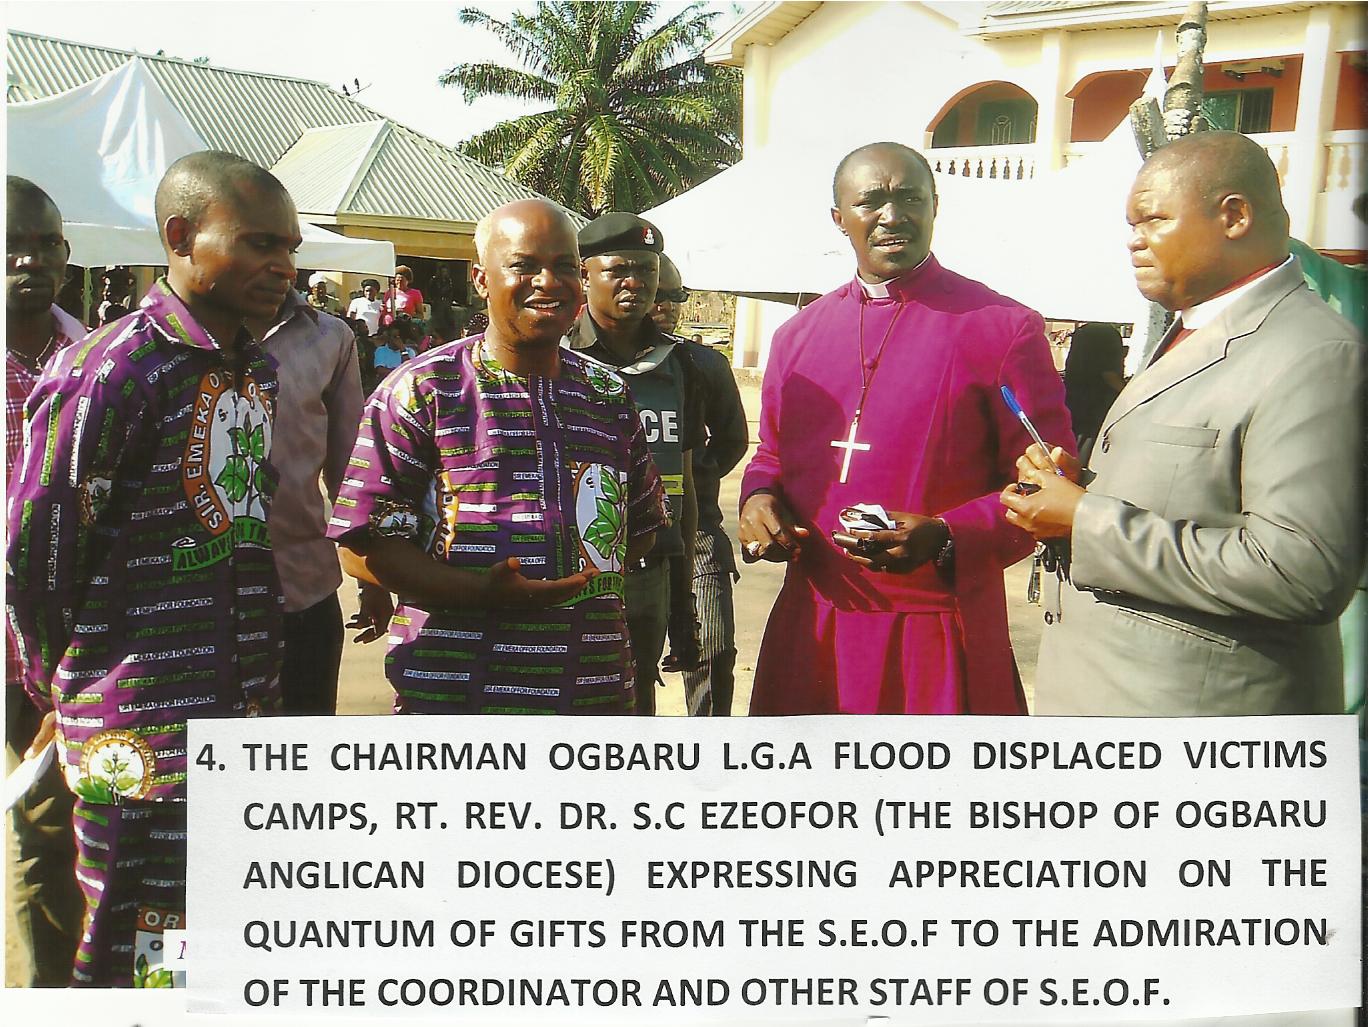 Visit to the Ogbaru L.G.A. Flood Displaced Victims Camps